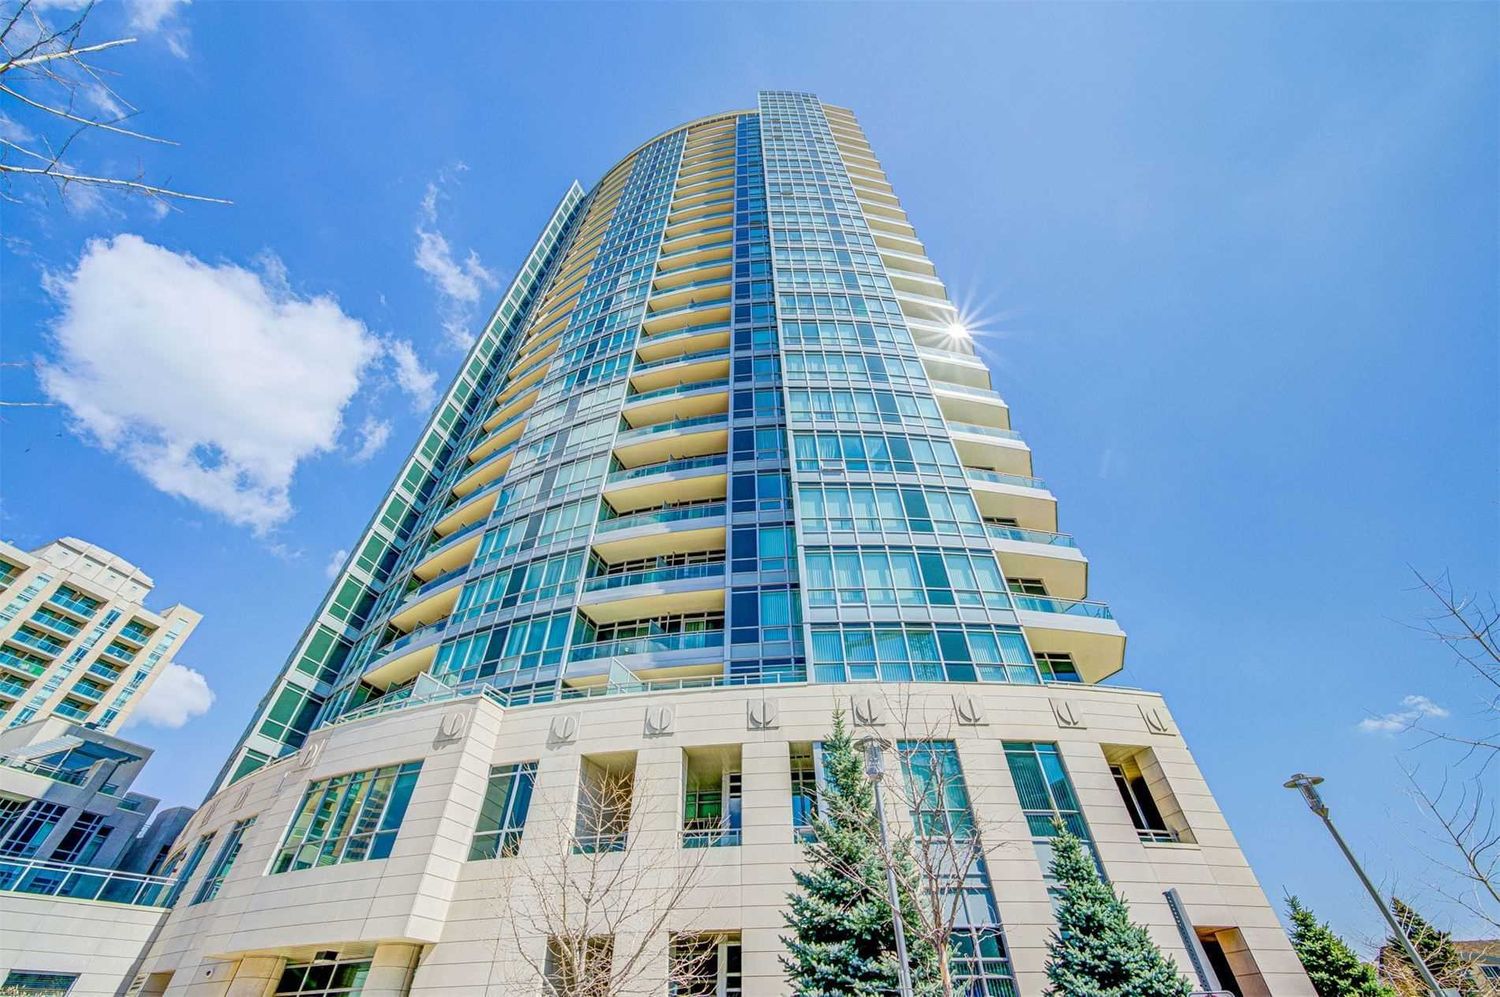 18 Holmes Avenue. Mona Lisa Residences is located in  North York, Toronto - image #2 of 2